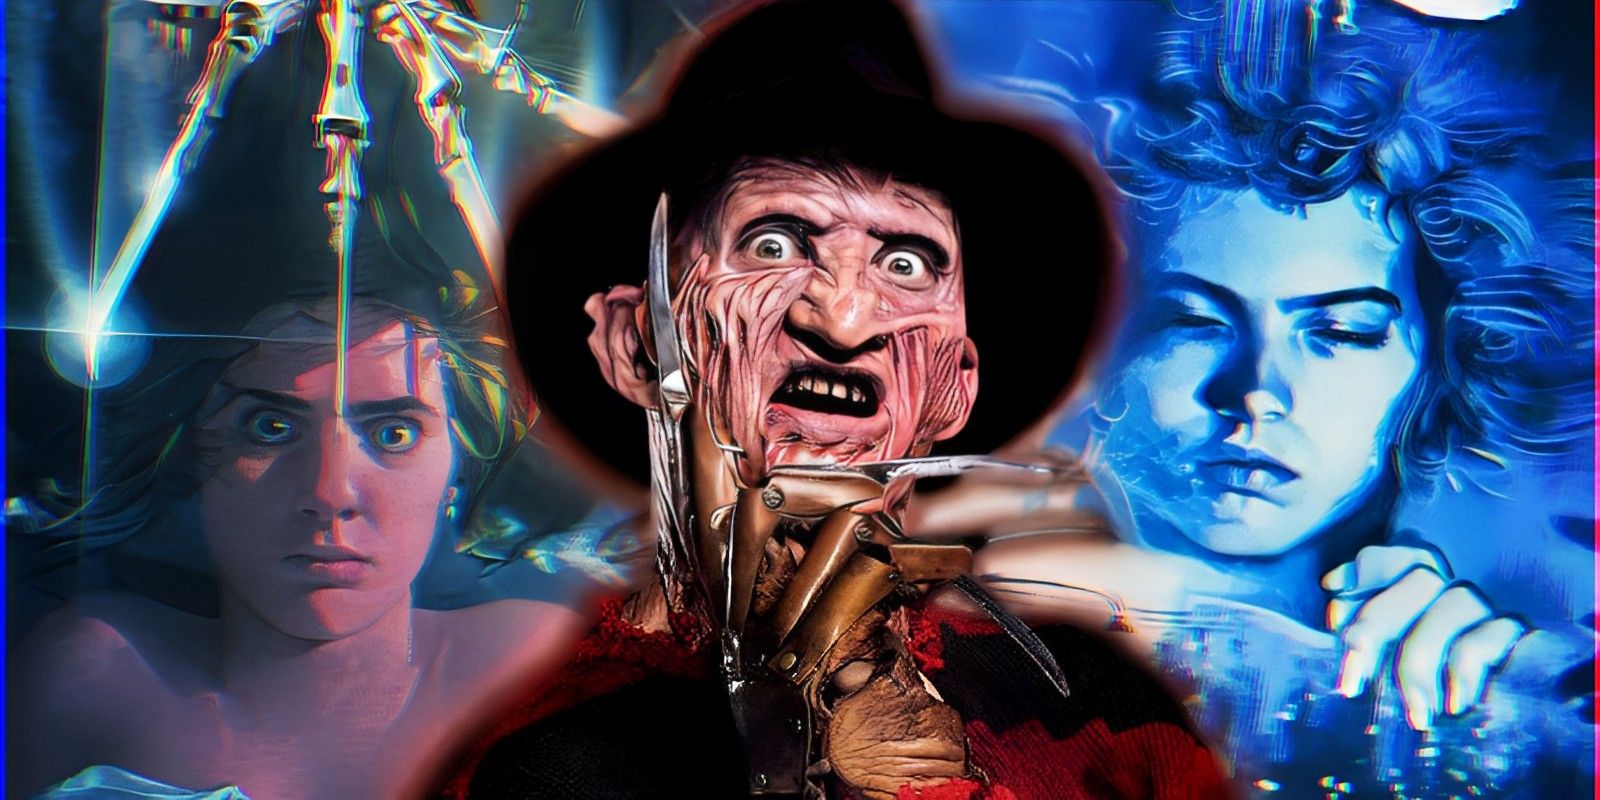 A Nightmare on Elm Street’s Freddy Krueger in front of the original movie posters.